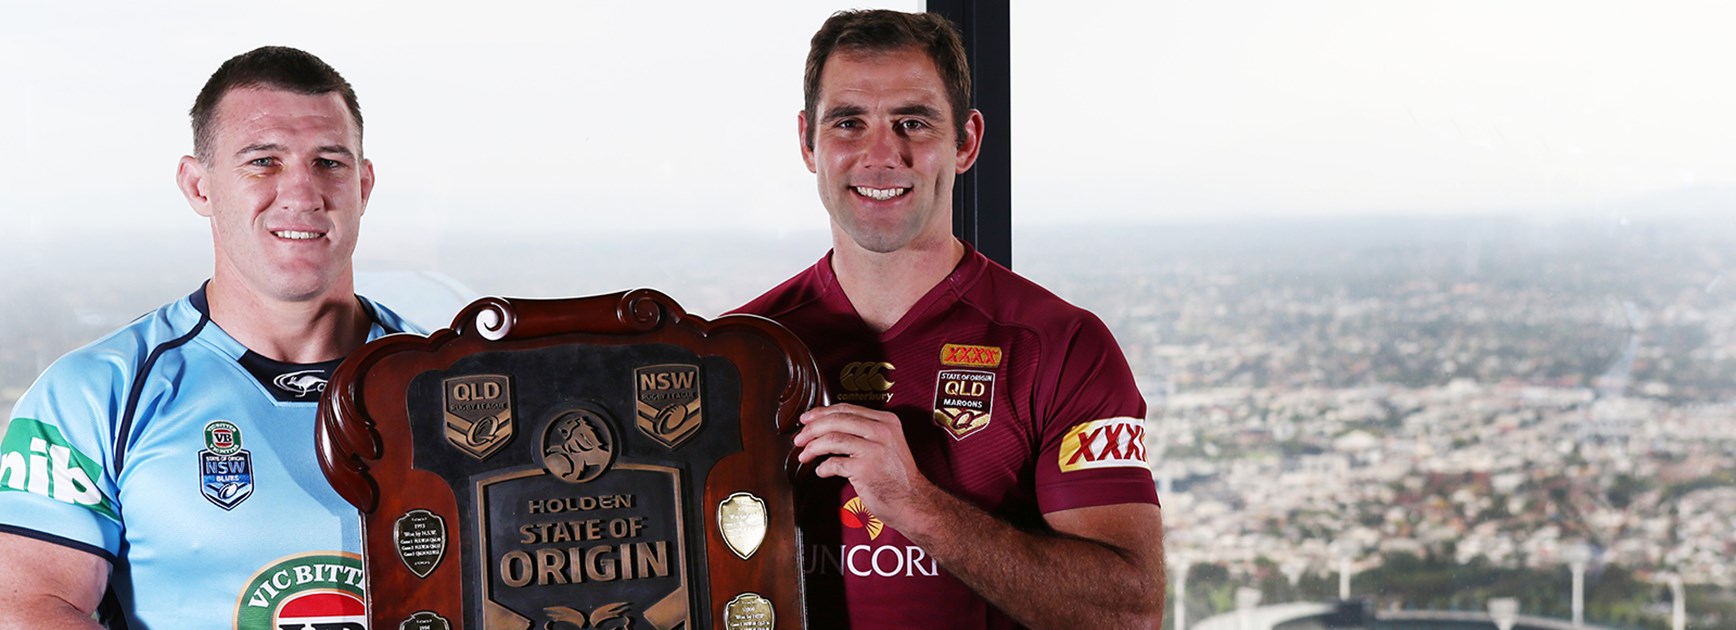 The MCG beckons for NSW Blues captain Paul Gallen and QLD Maroons captain Cameron Smith in State of Origin II.